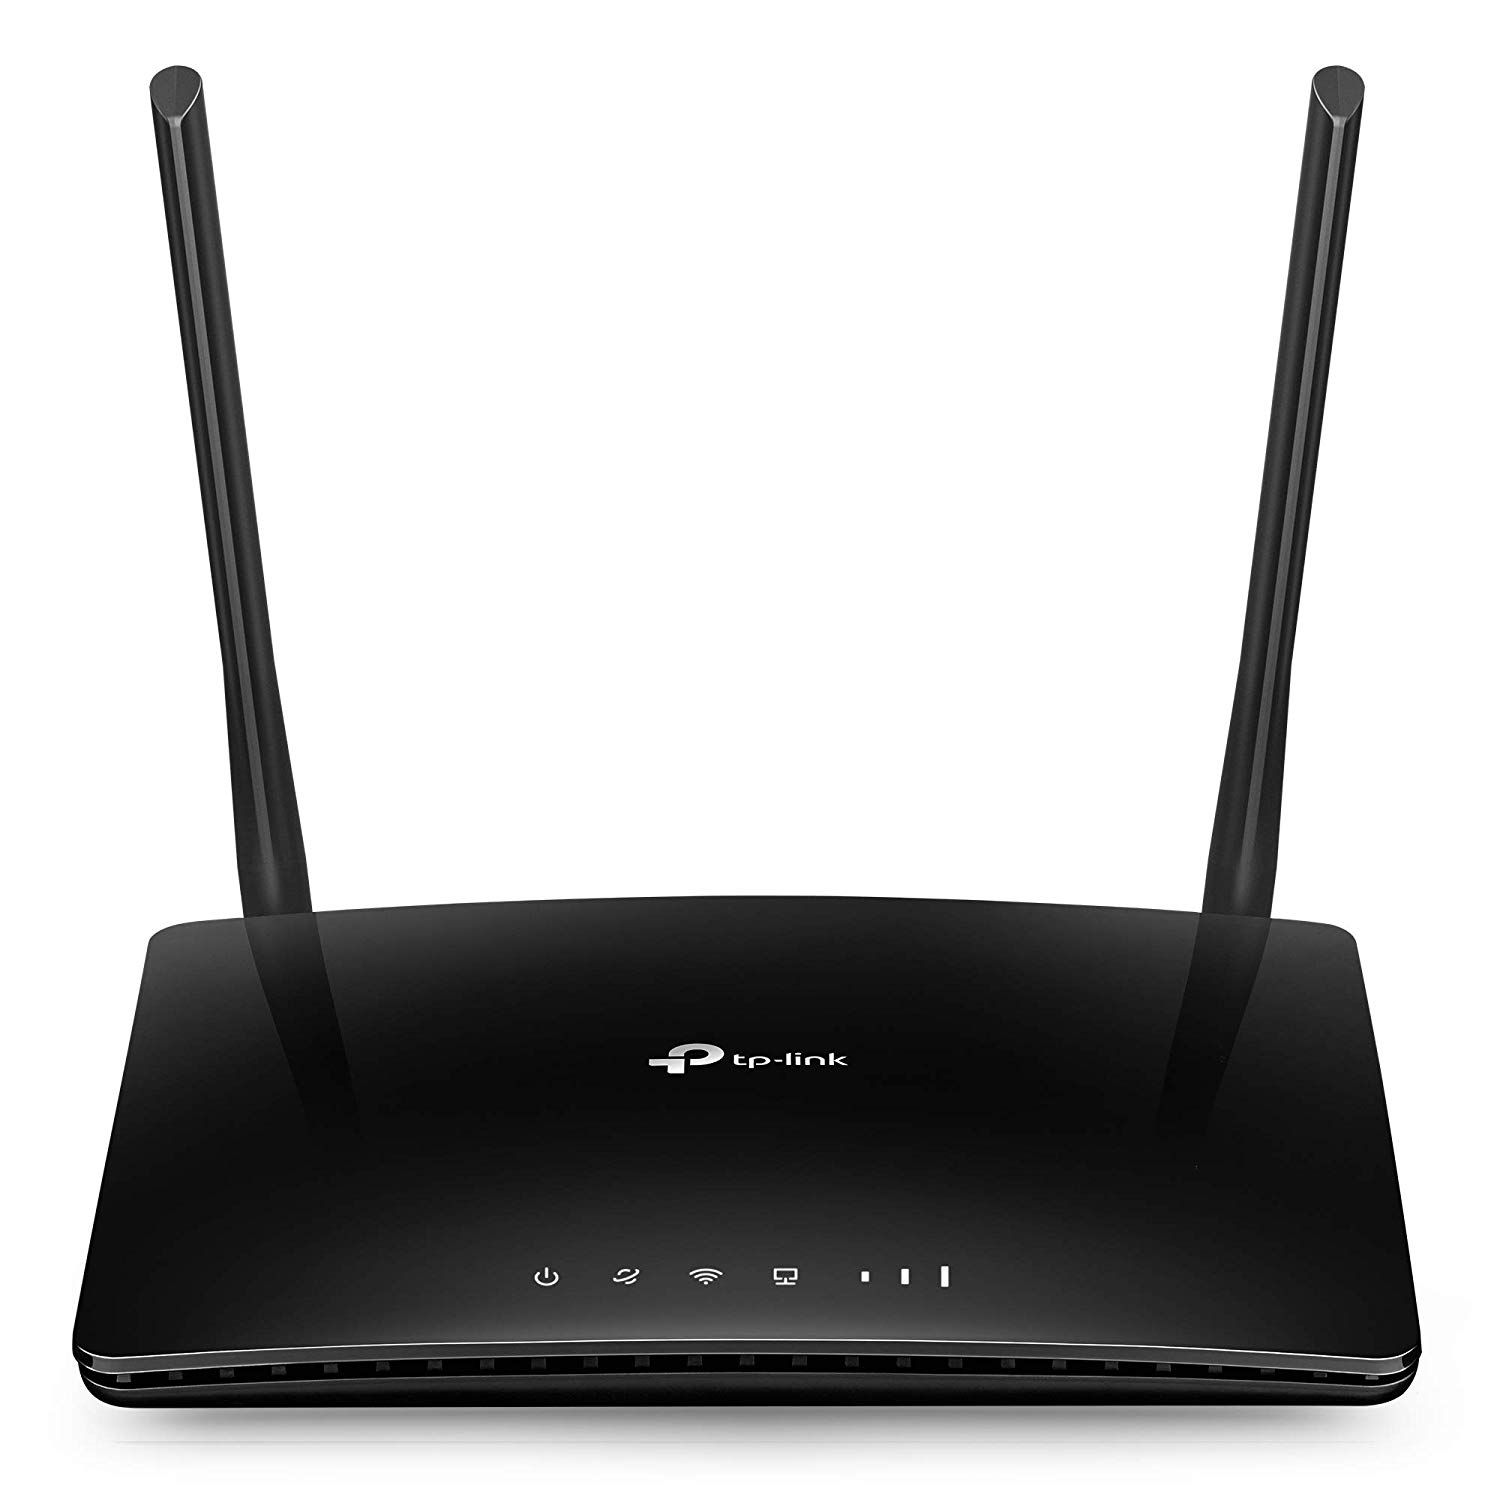 TP-Link Archer MR200 AC750 Wireless Dual Band 4G LTE Router (Black, Not